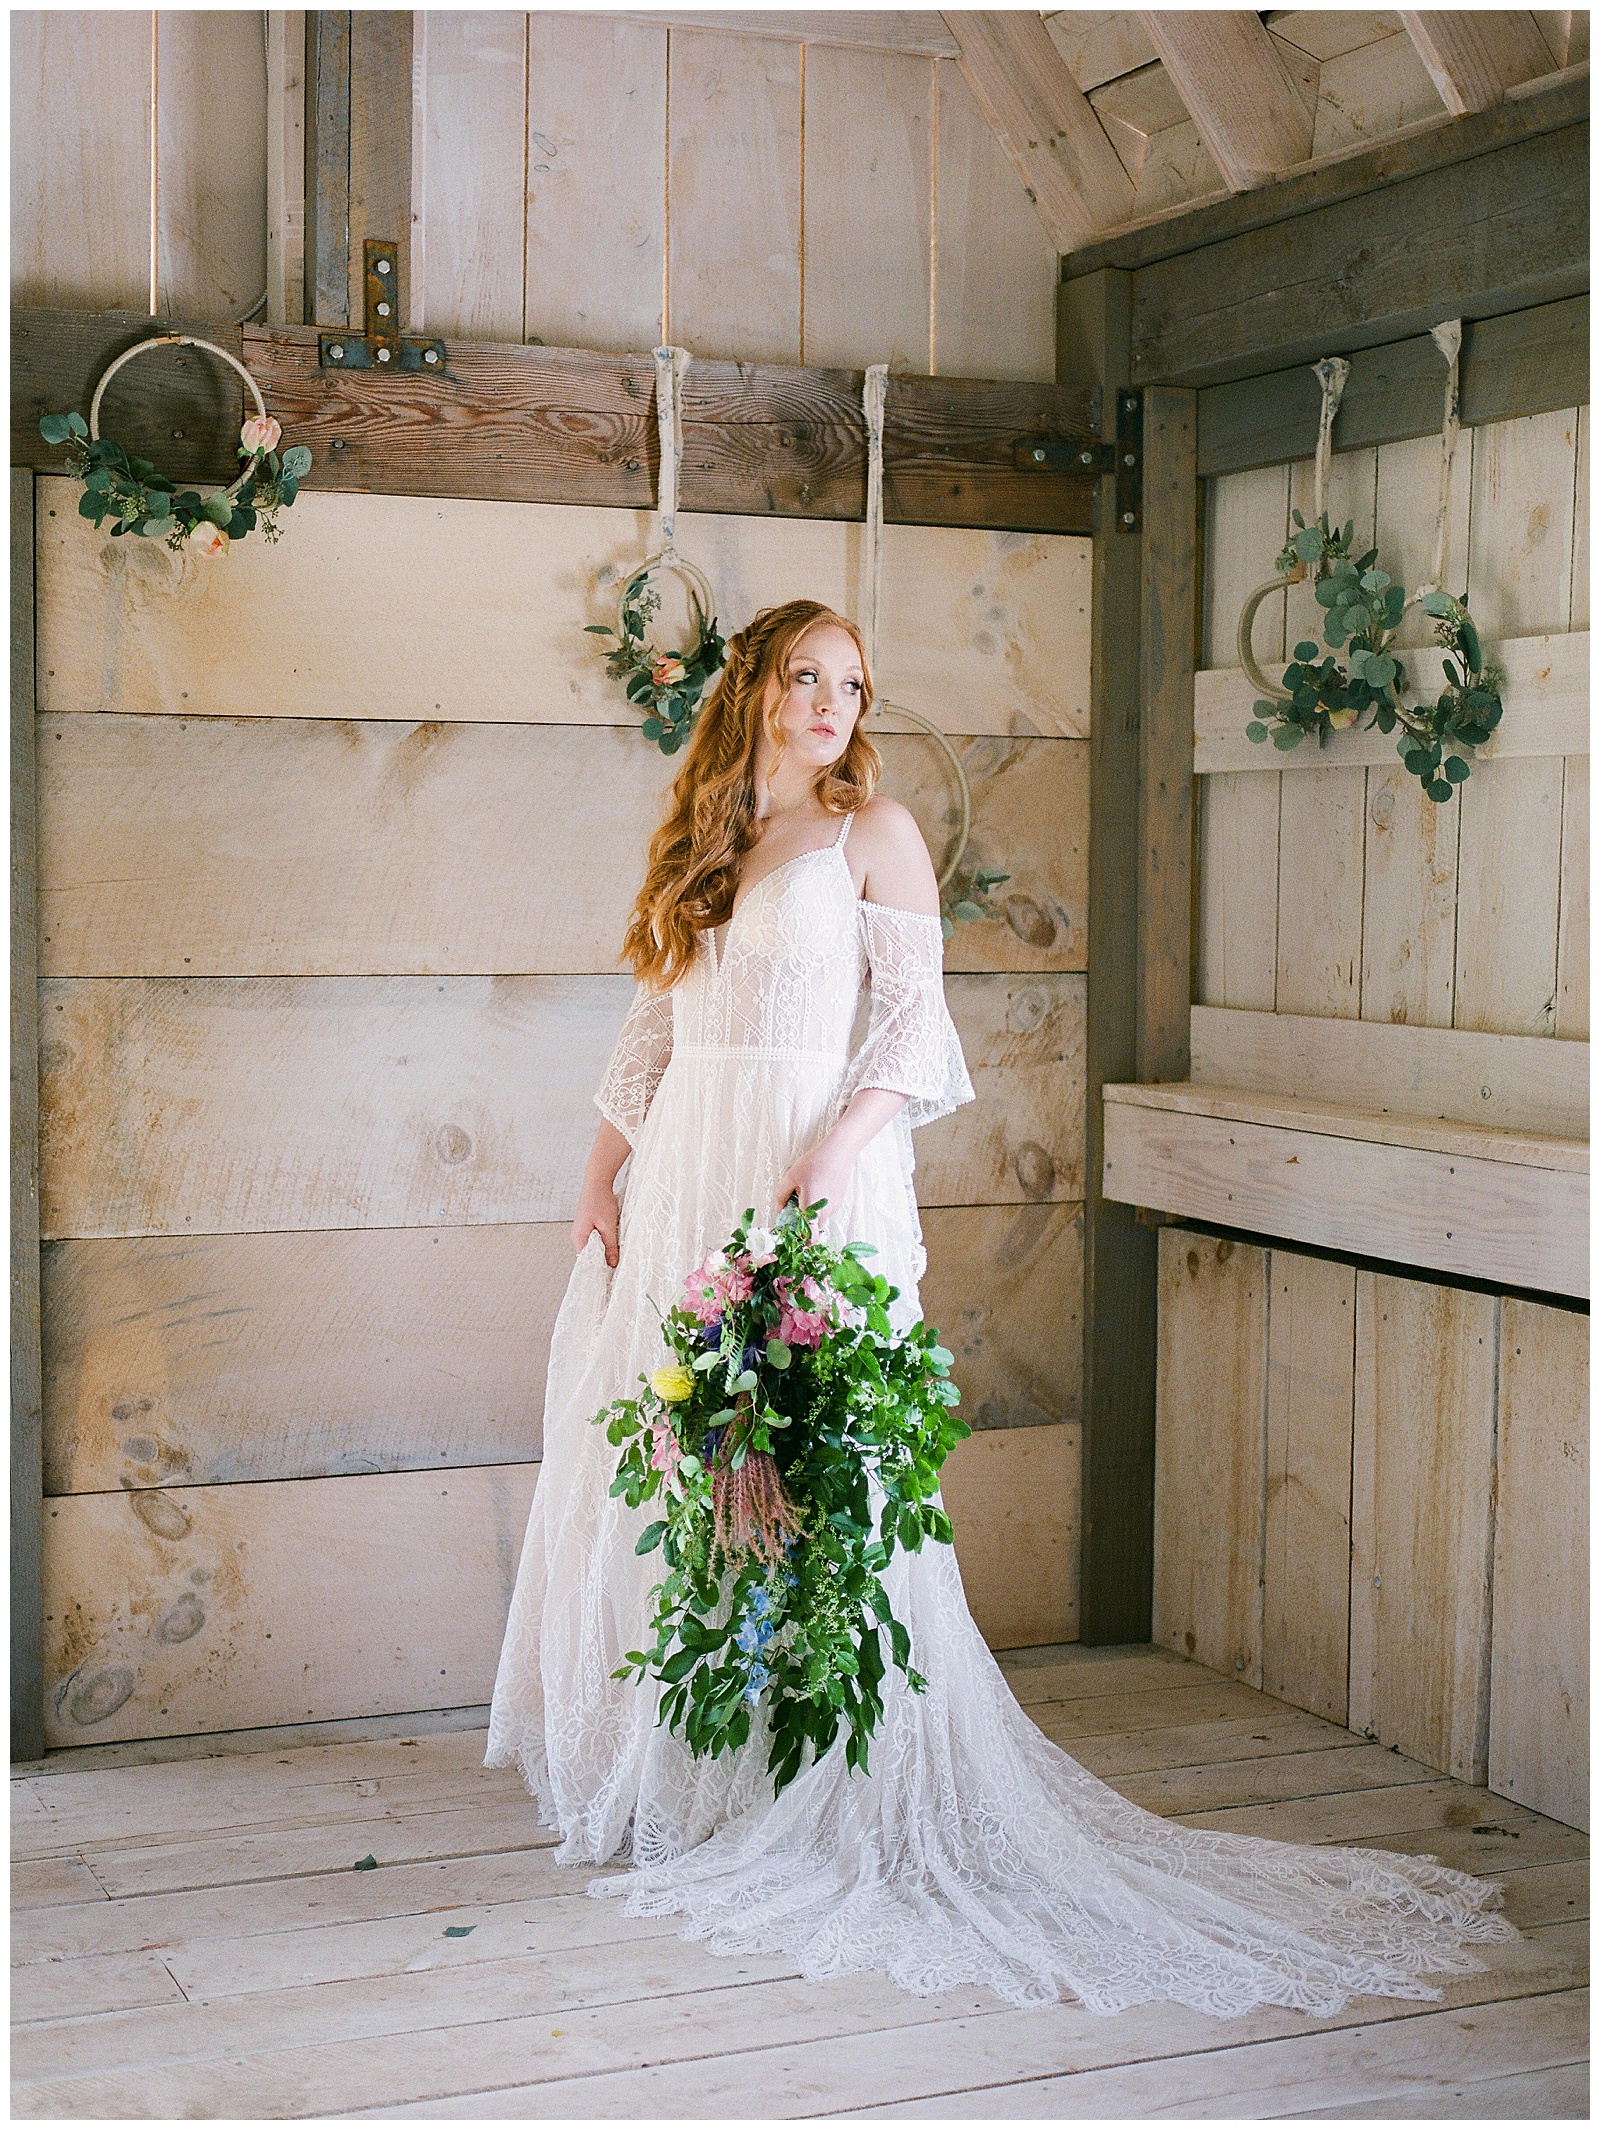 Redheaded woman in a bohemian white bridal gown stands in Ramble Creek Vineyard barn holding a large floral bouquet looking out the window